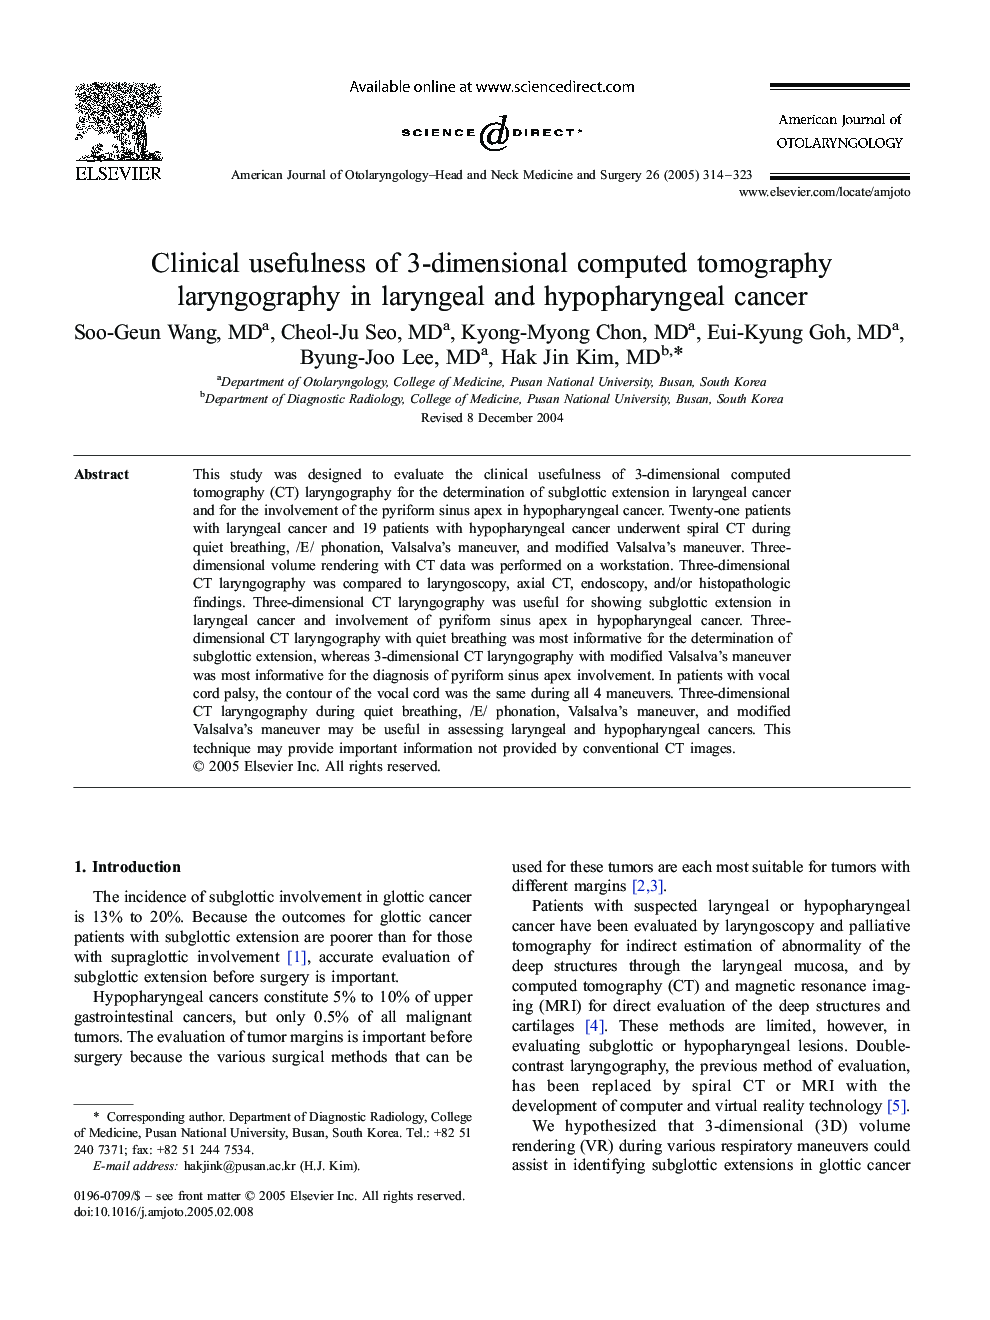 Clinical usefulness of 3-dimensional computed tomography laryngography in laryngeal and hypopharyngeal cancer